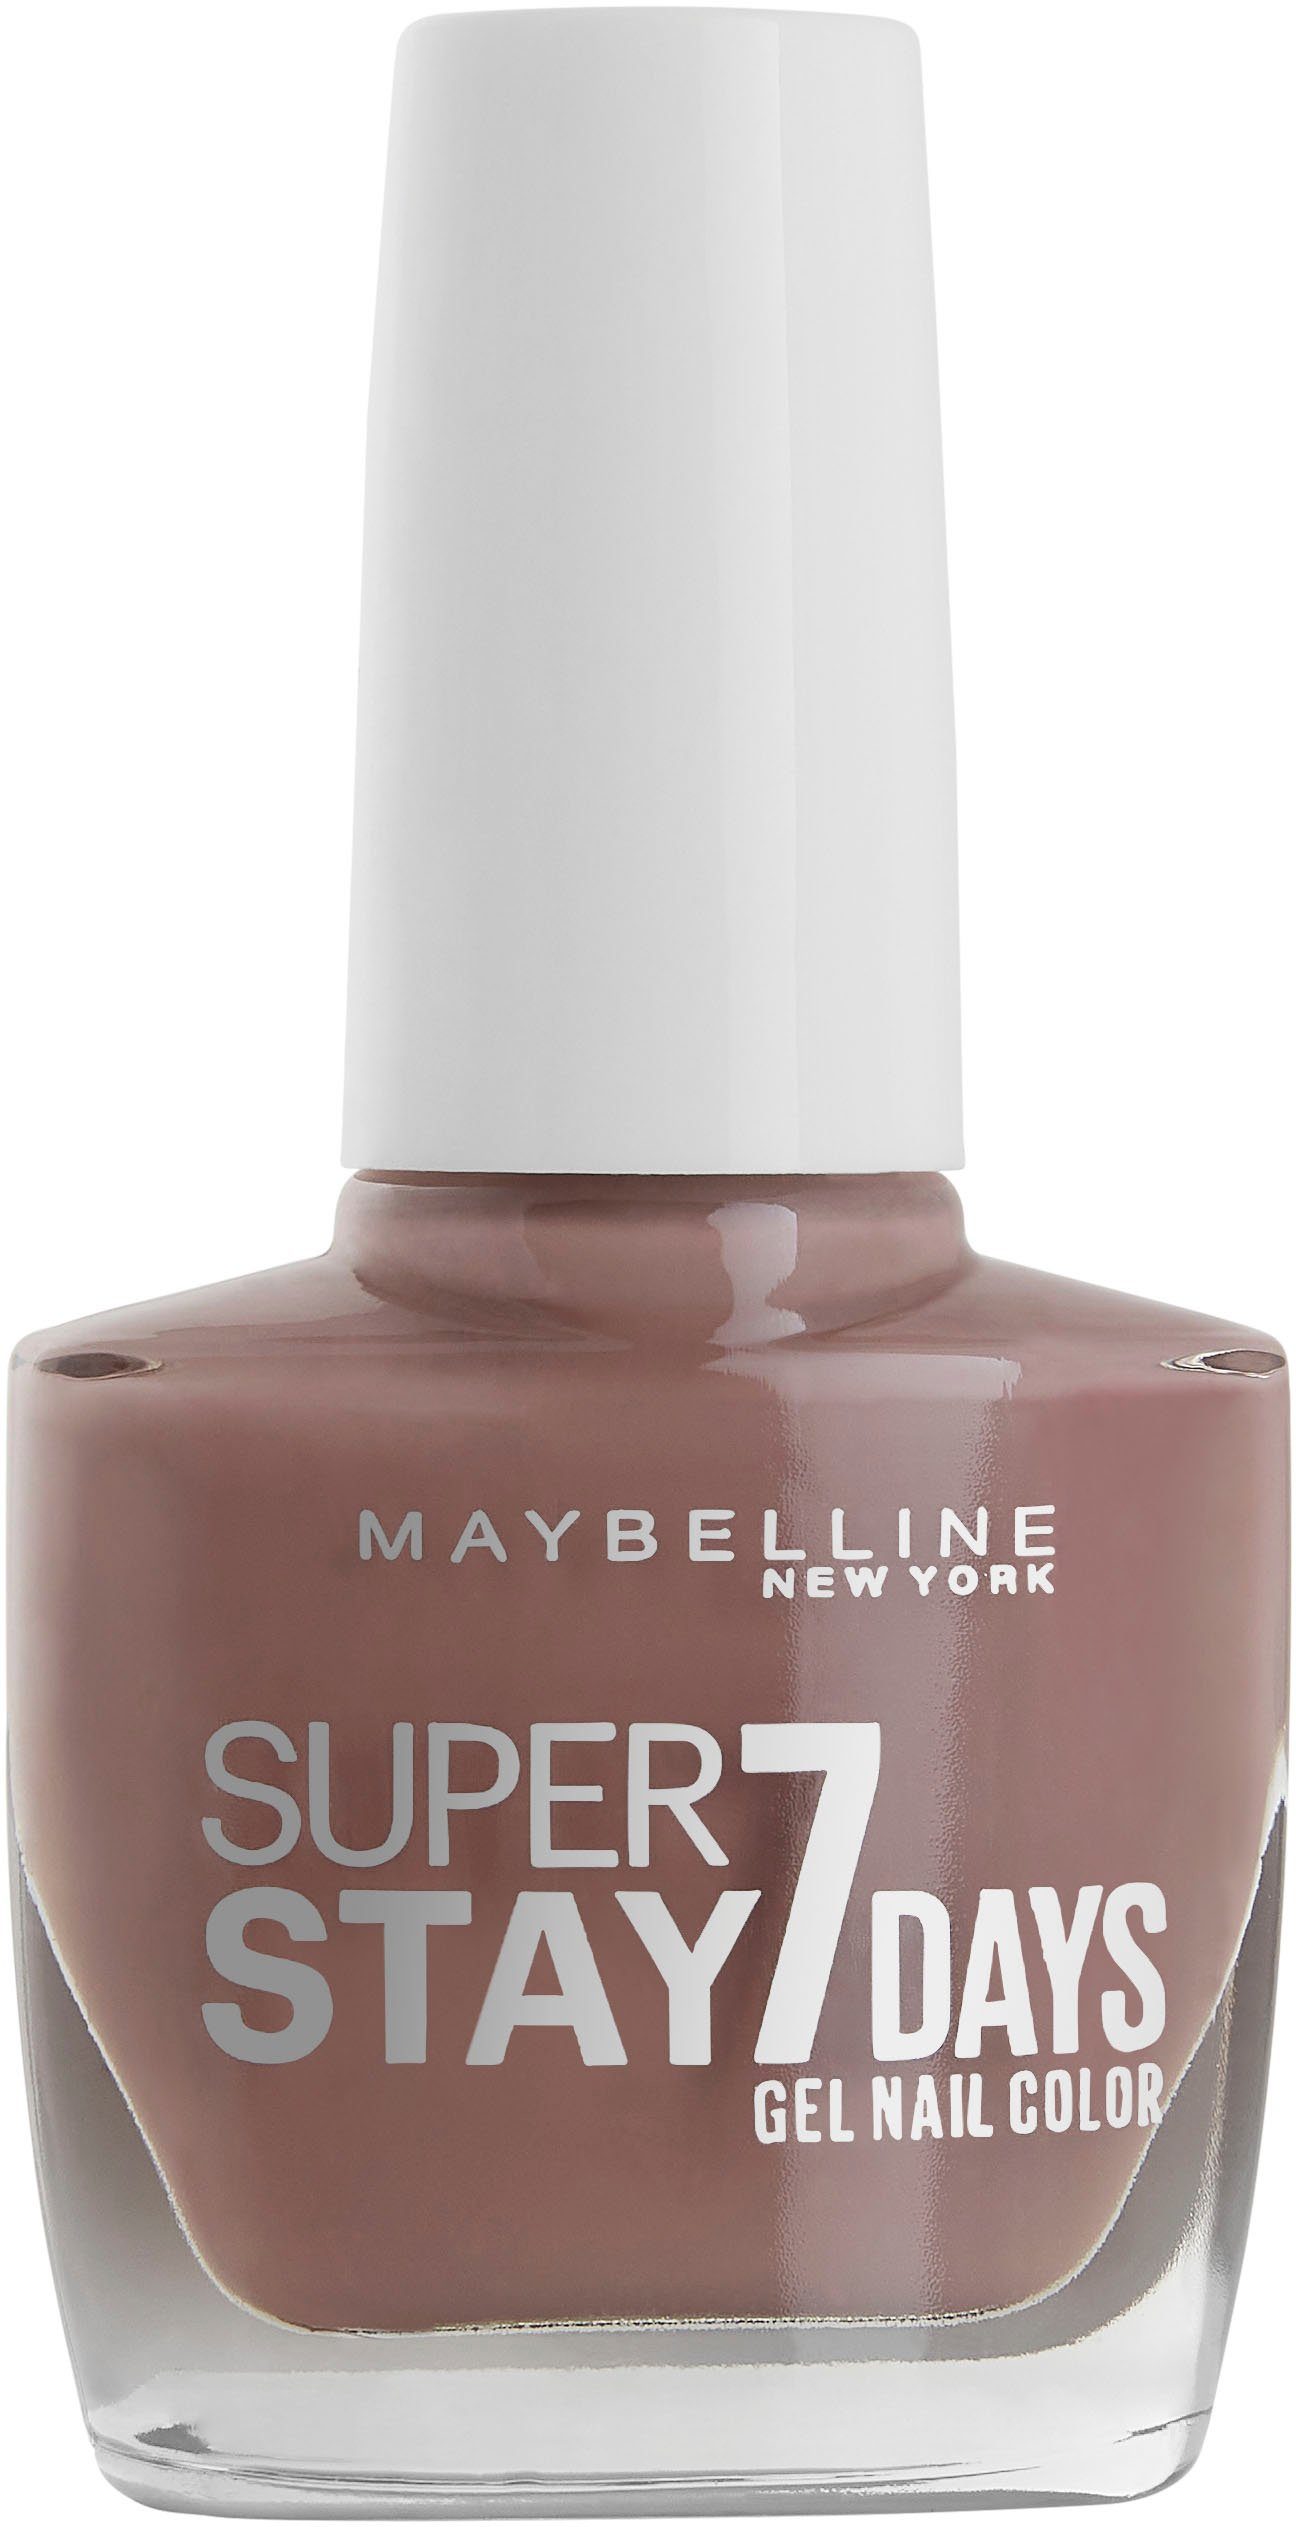 MAYBELLINE NEW YORK Nagellack Superstay 7 Days Nr. 930 Bare it All